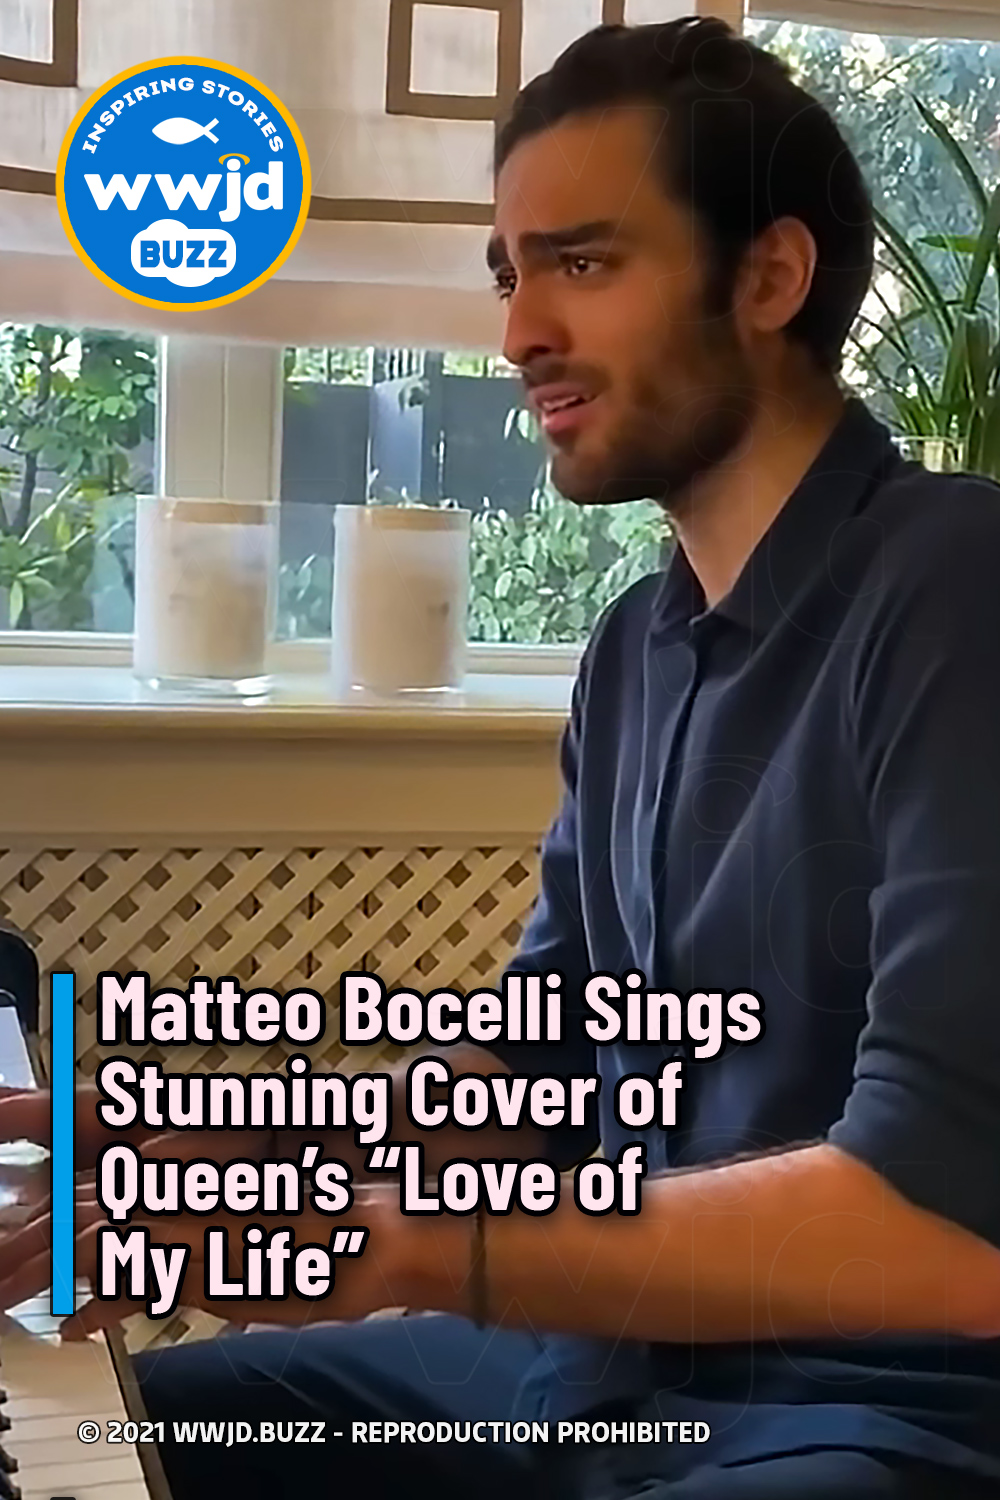 Matteo Bocelli Sings Stunning Cover of Queen’s “Love of My Life”